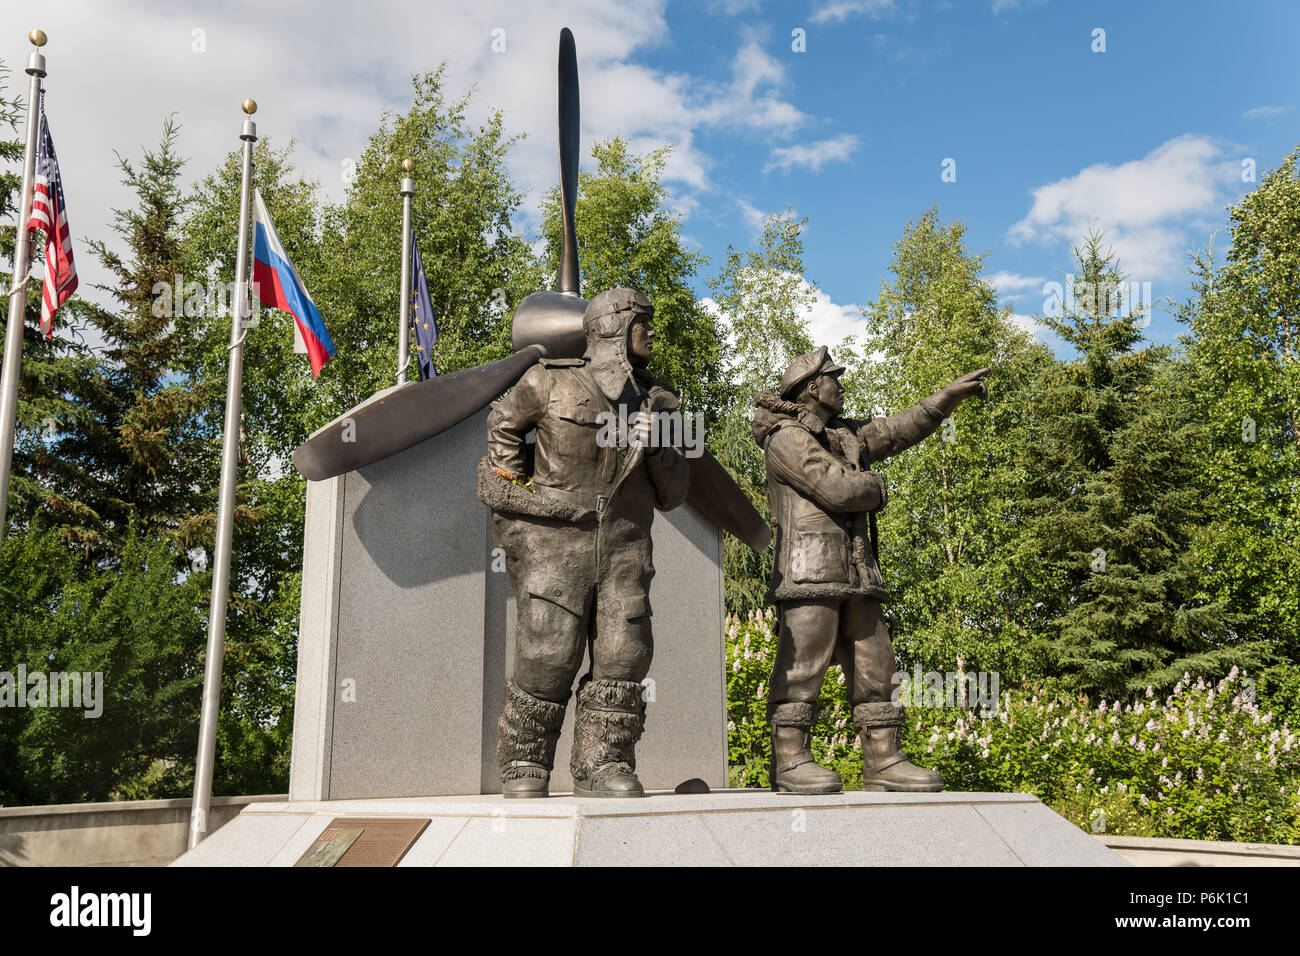 A tourist views the Lend Lease Monument in downtown riverfront park in Fairbanks, Alaska. The statue depicts Russian and American WWII pilots, commemorating Alaska as the staging ground in the Lend-Lease program which provided nearly 8,000 aircraft to the eastern front. Stock Photo